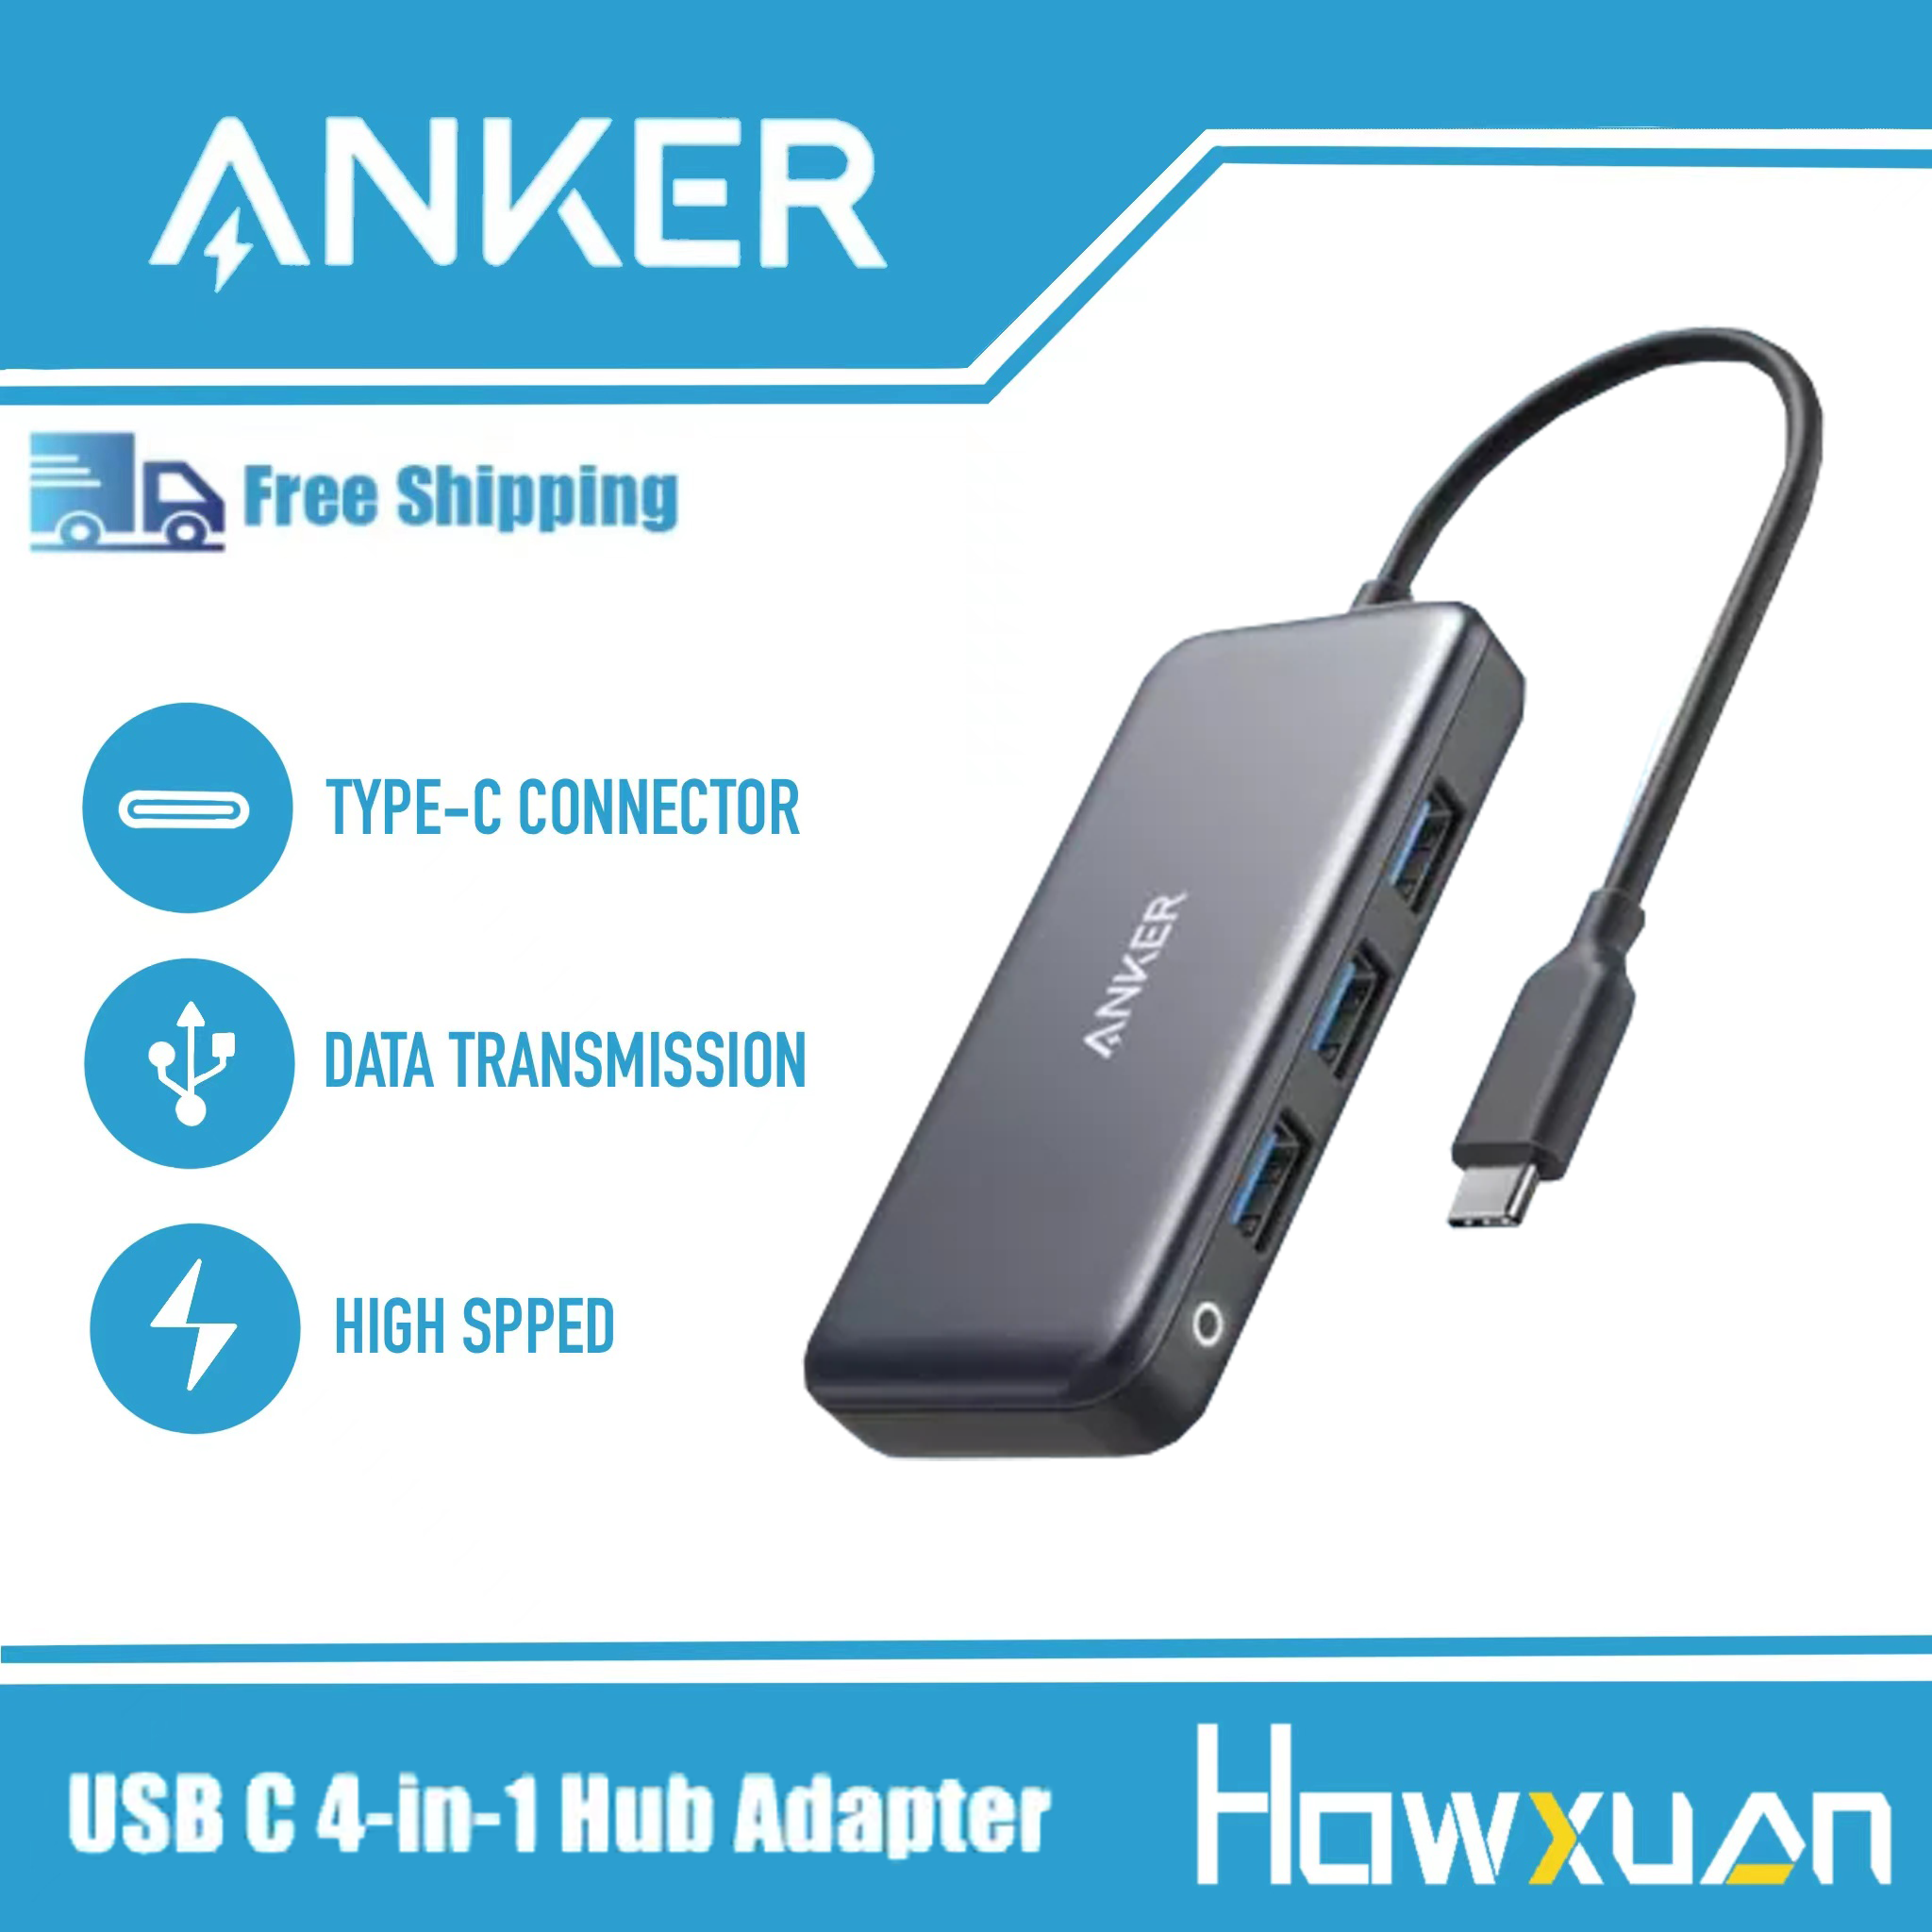 Anker A8321 Premium 4-in-1 USB C Hub Adapter with 60W Power Delivery